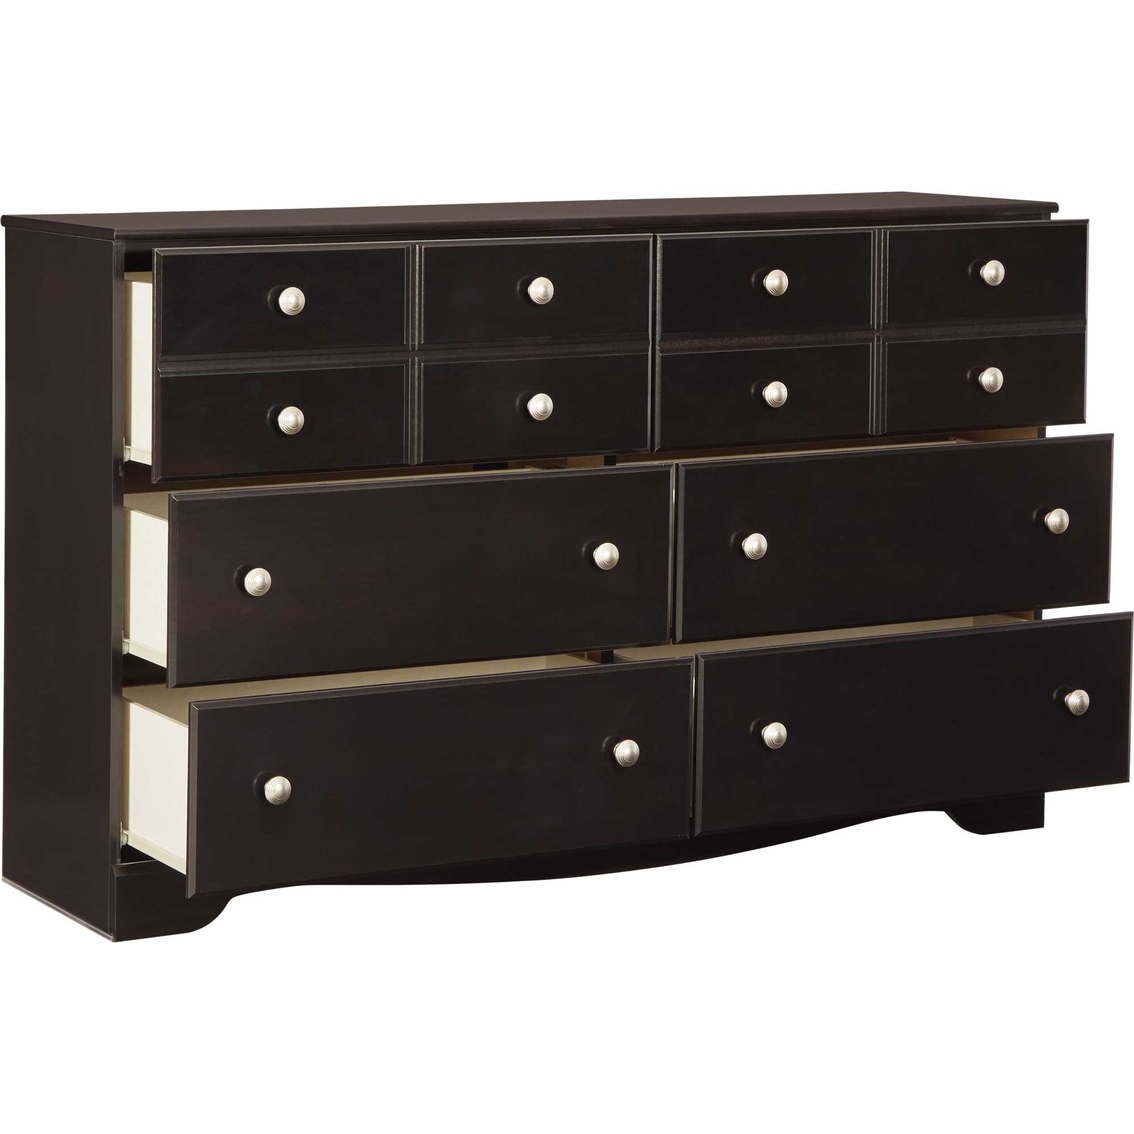 Signature Design by Ashley Mirlotown 6 Drawer Dresser and Mirror - Image 4 of 8